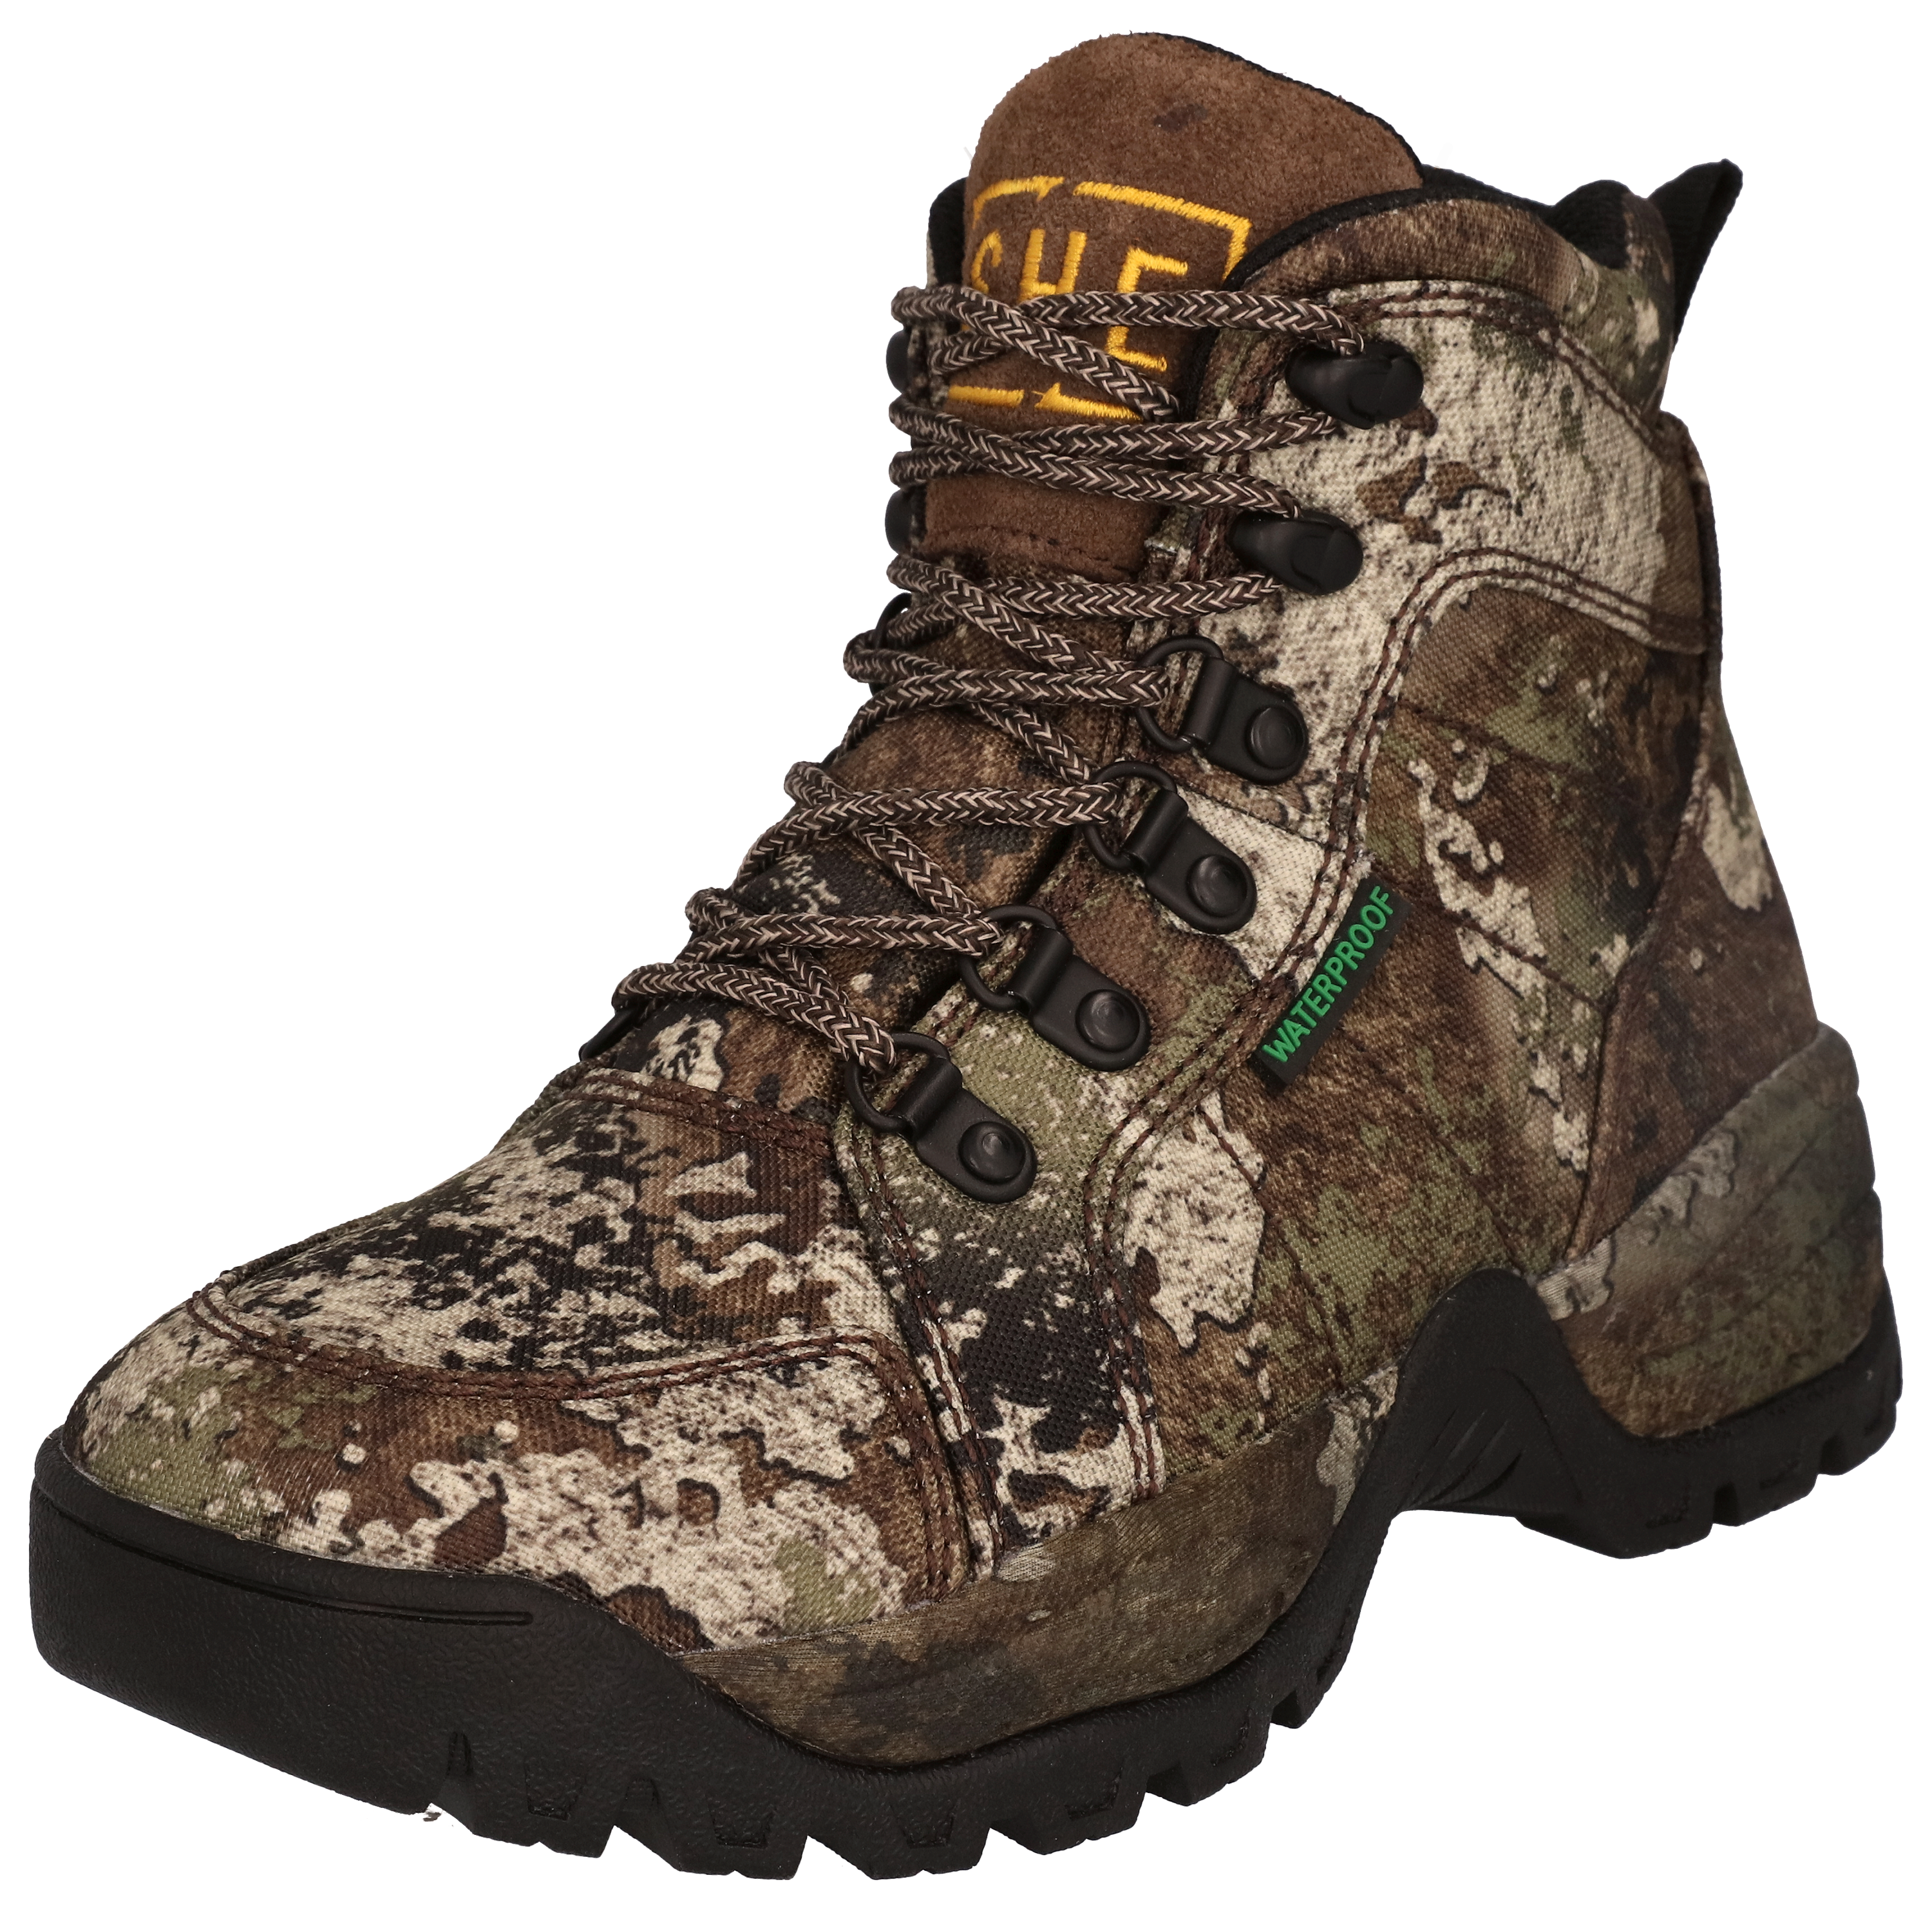 SHE Outdoor Timber Buck Waterproof Hunting Boots for Ladies - TrueTimber Strata - 7.5M